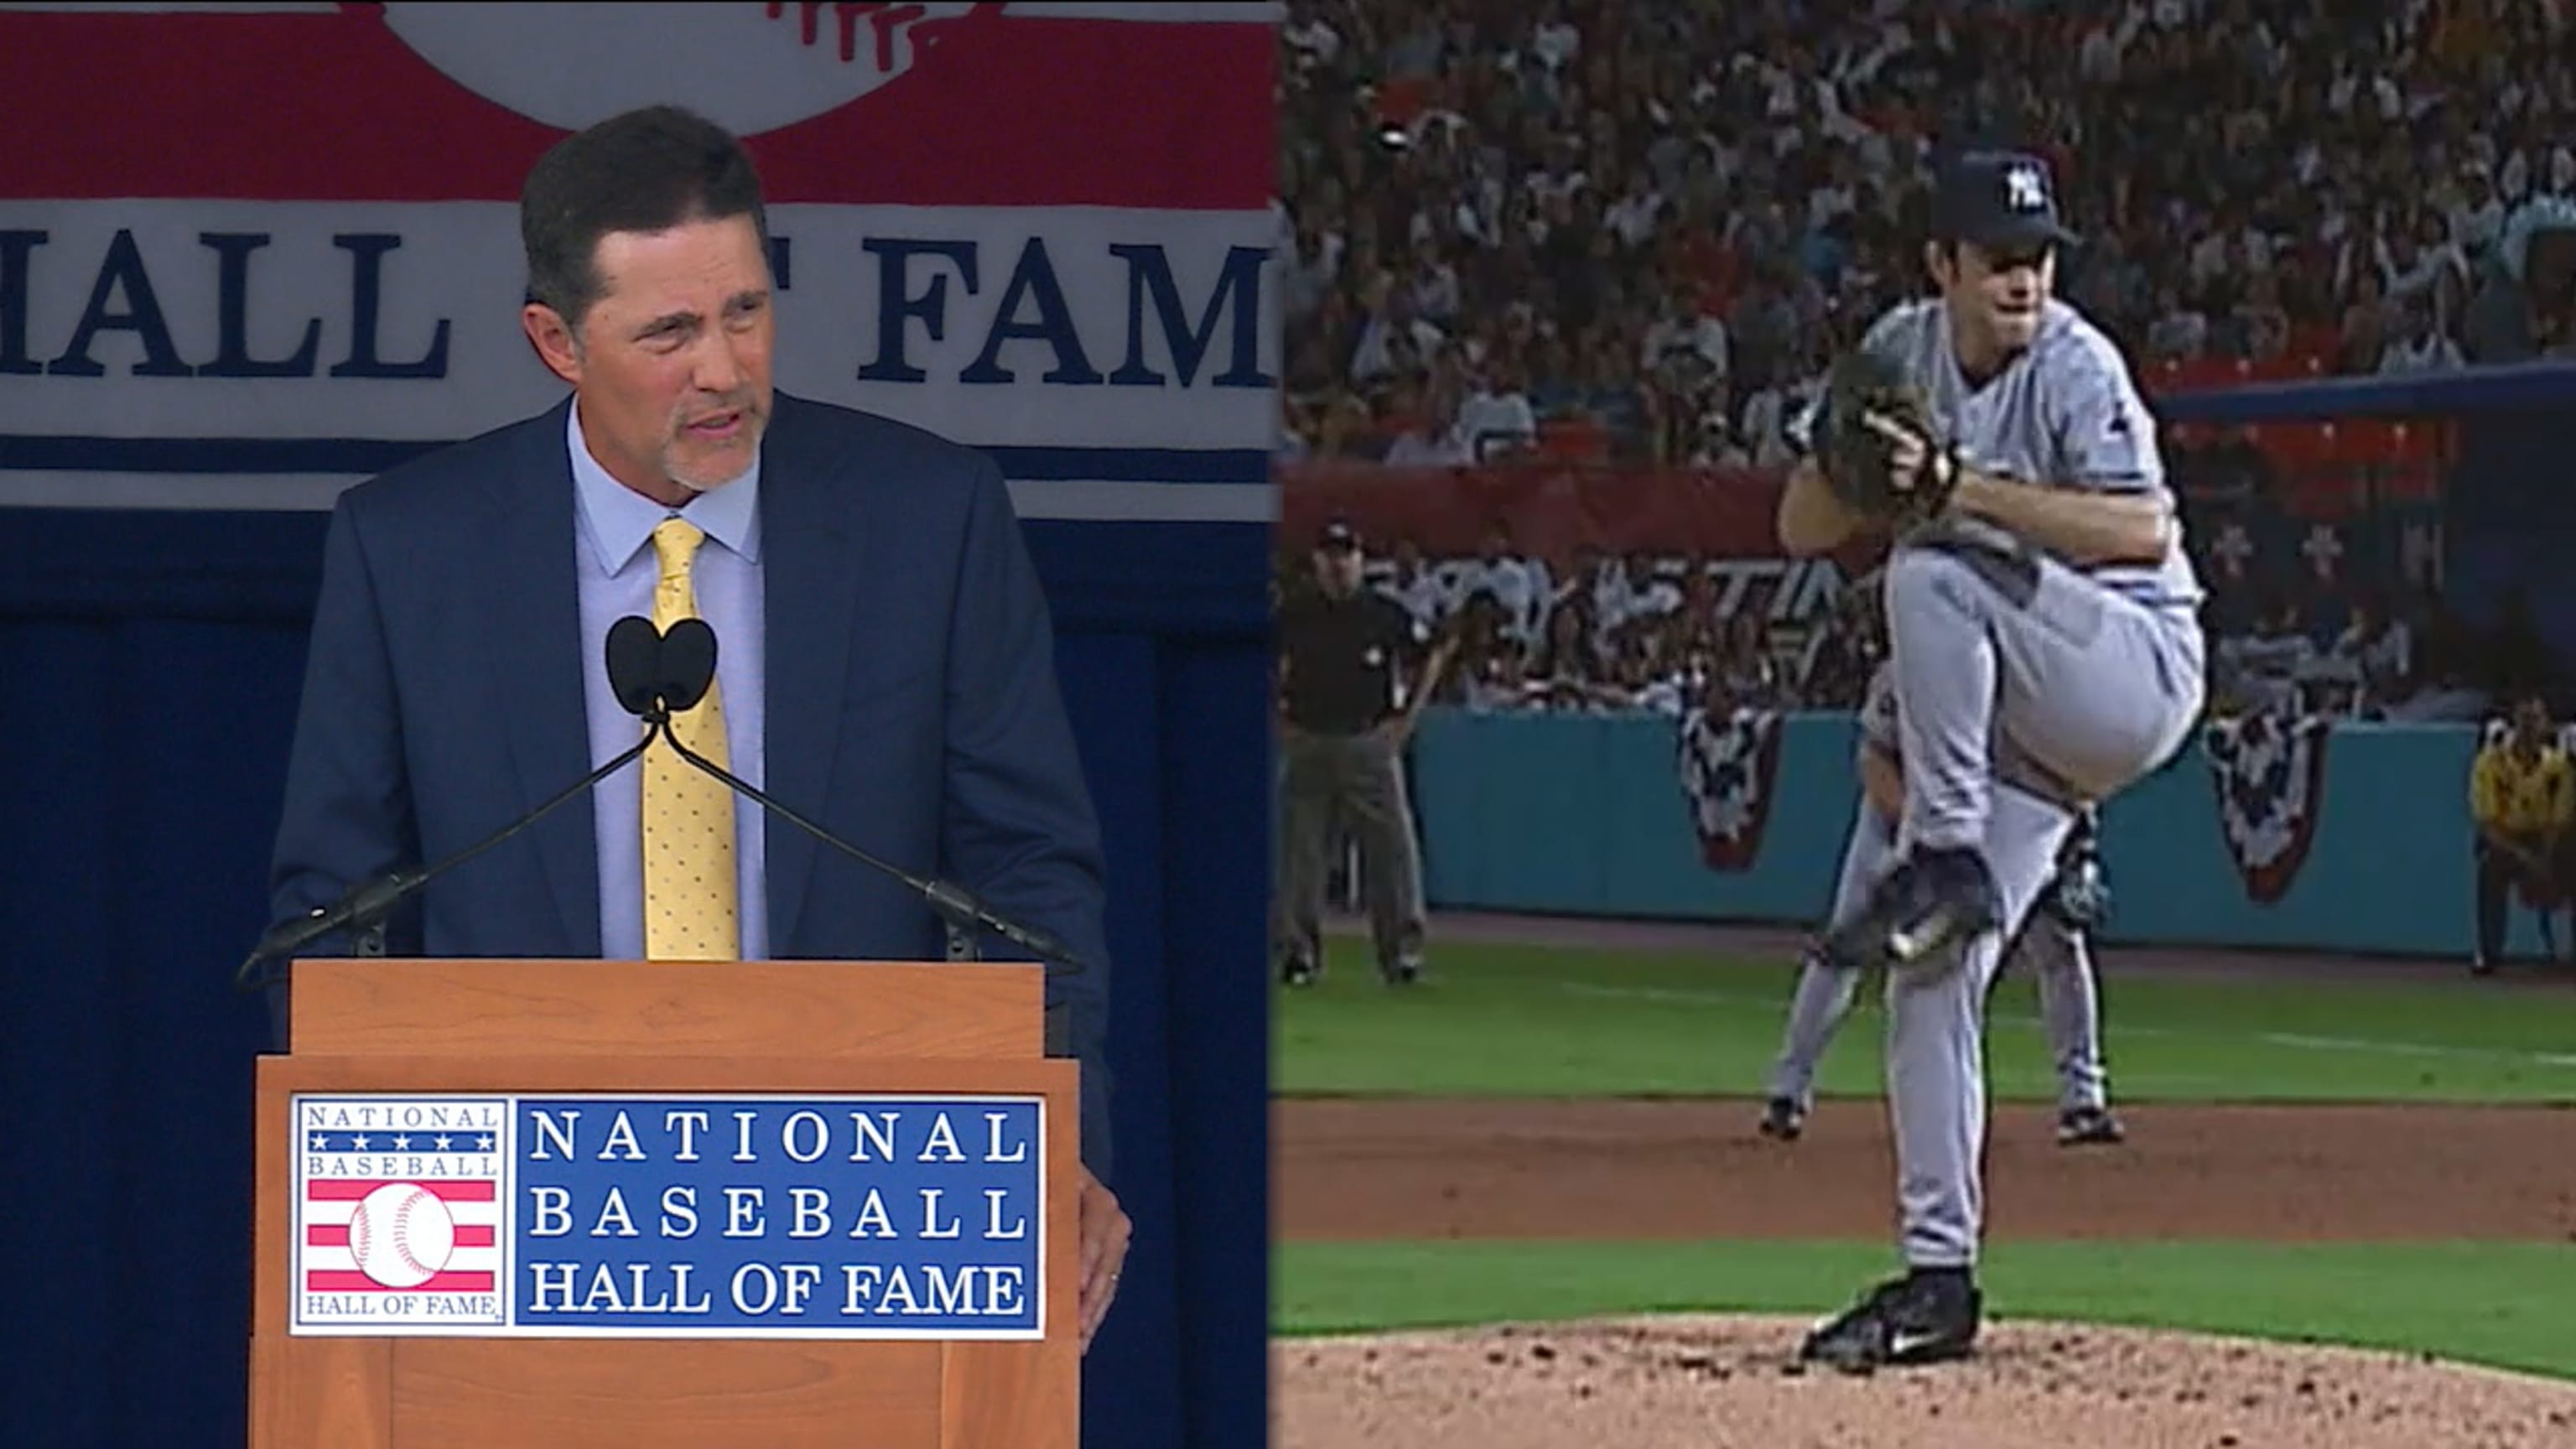 Photos: Mike Mussina prepares to enter Baseball Hall of Fame